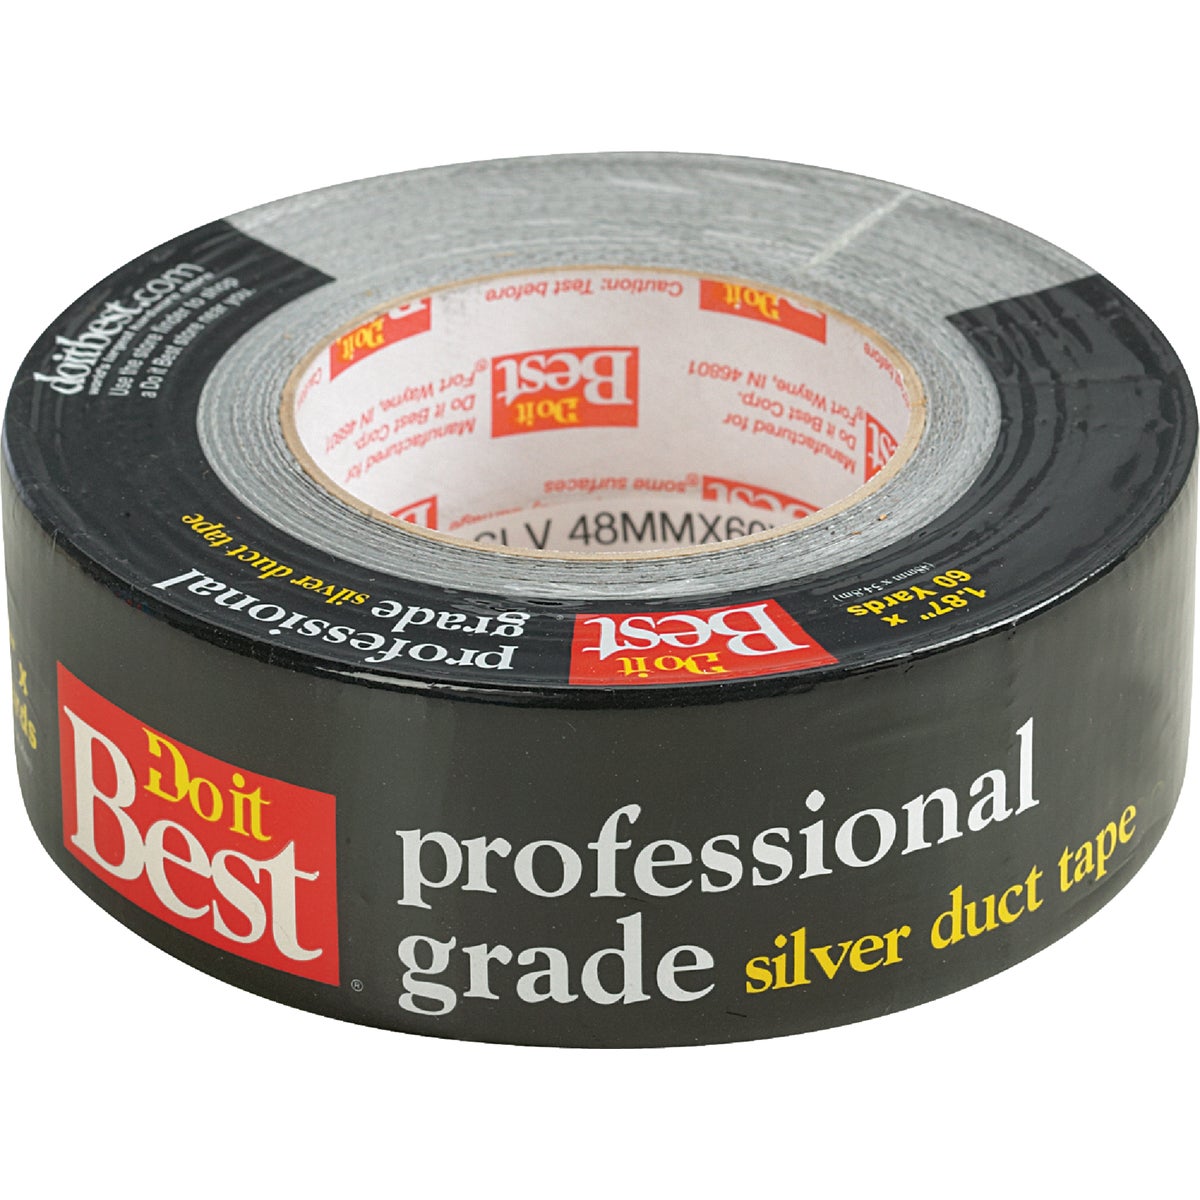 2X60YDS TAPE DUCT PROFESSIONAL GRADE SILVER DO IT BEST